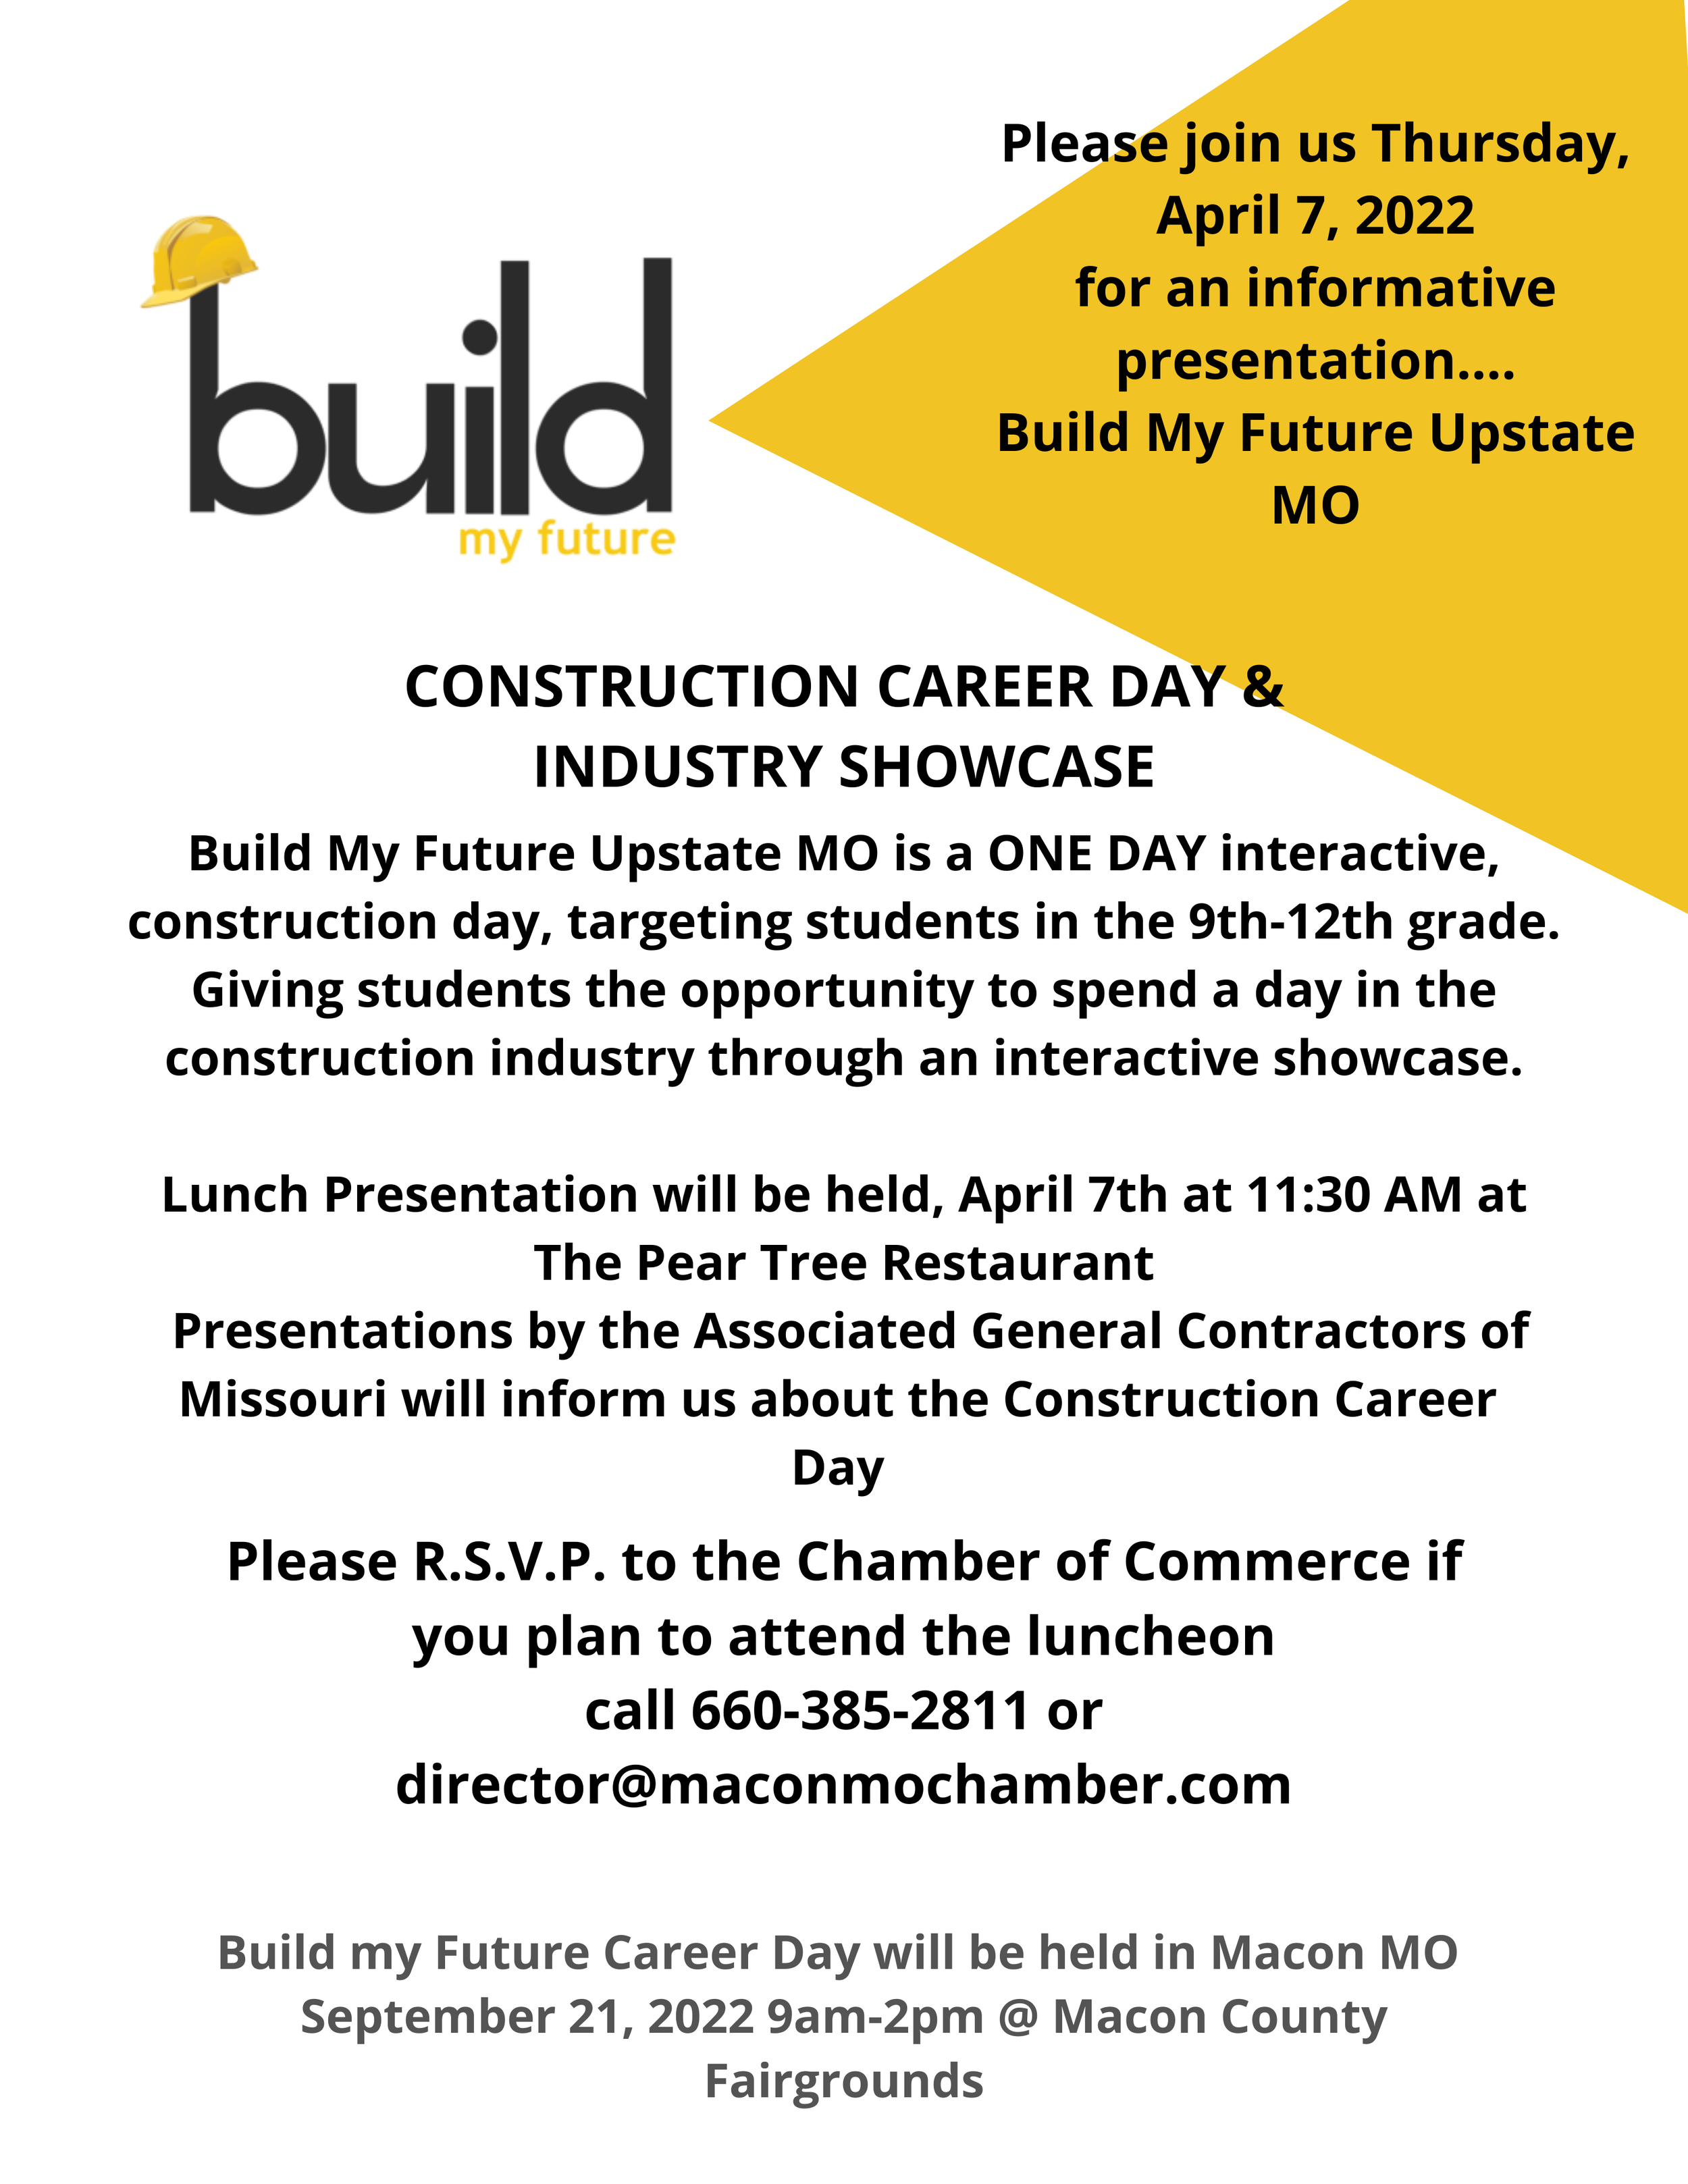 Please join us Apirl 7, at 1130 at The Pear Tree Bar & Grill for an informational meeting to learn more about Build My Future Upstate Missouri. Please R.S.V.P. to the Chamber of Commerce if you plan to a (2).png